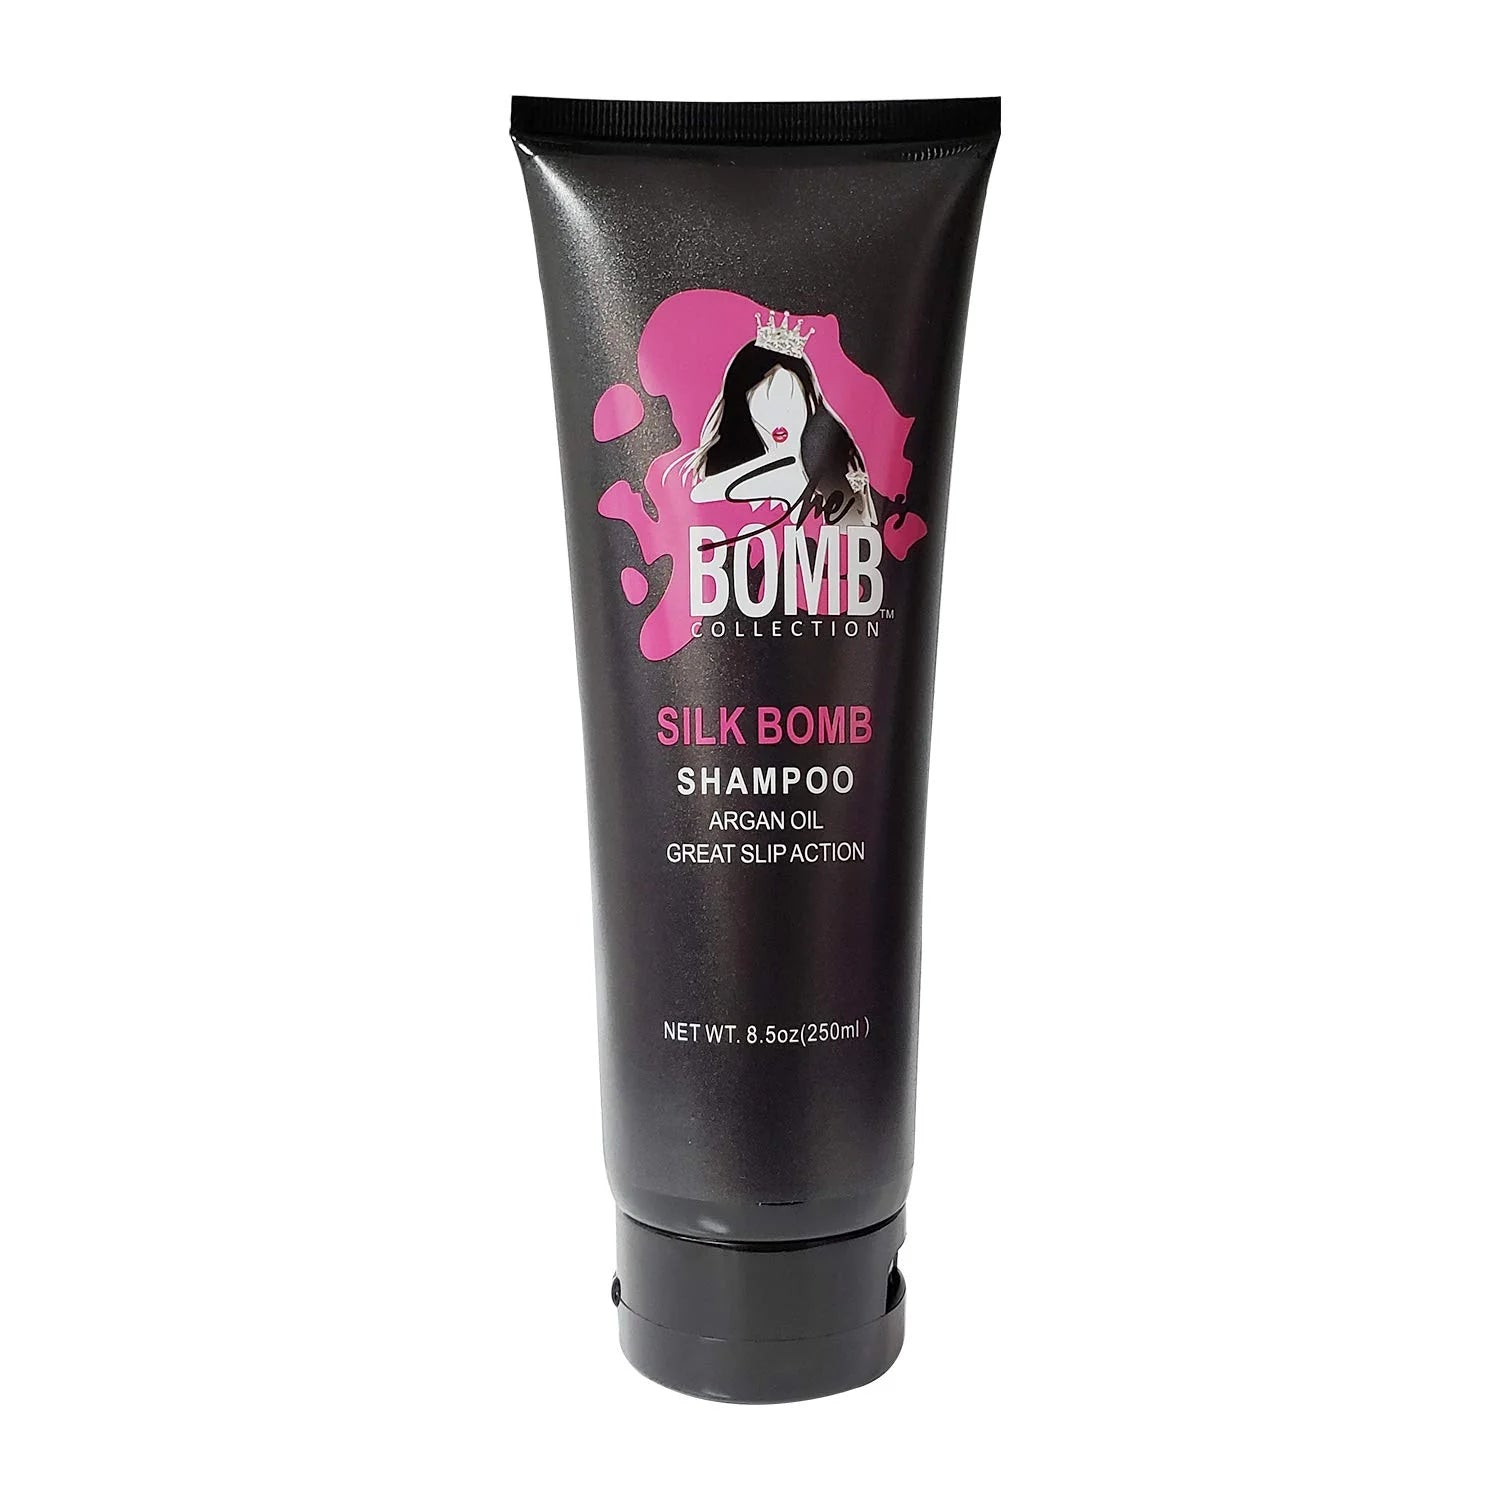 She is Bomb Collection Silk Bomb Argan Oil Conditioner - 8.5 oz